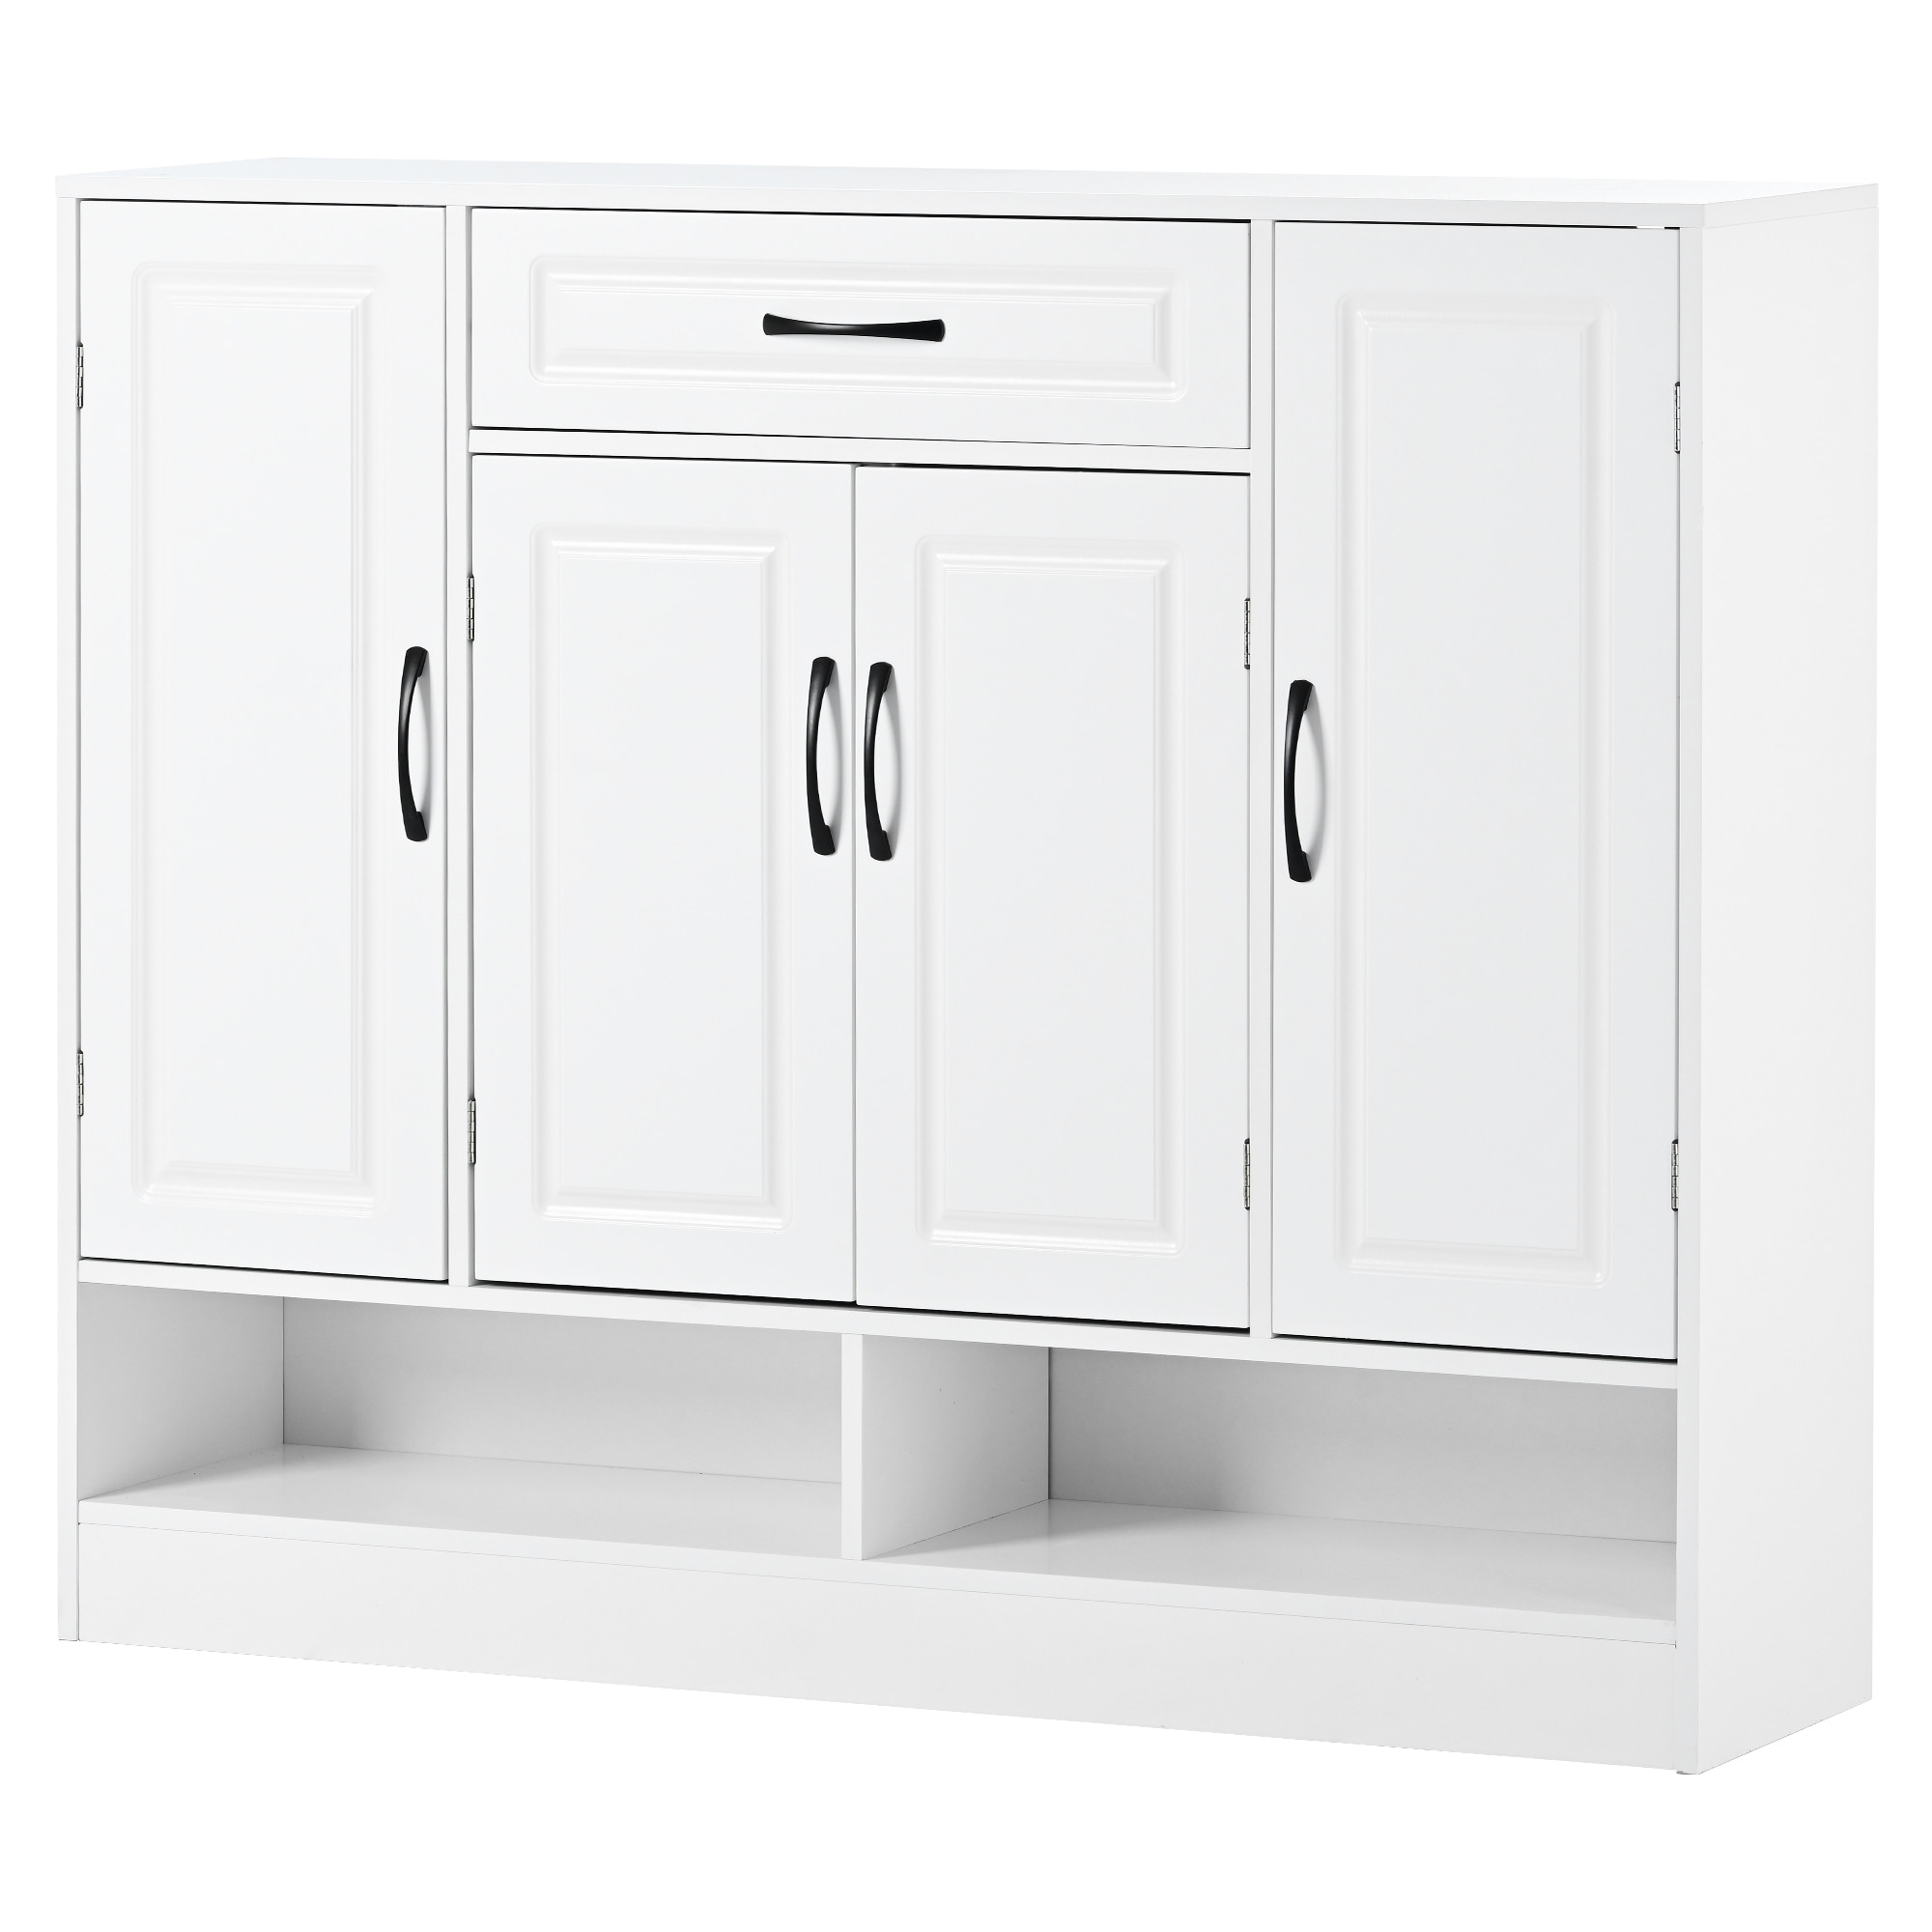 https://ak1.ostkcdn.com/images/products/is/images/direct/15b4f220eb6be692050ec6d129ef5bf4ec08b144/Shoe-Cabinet-for-Entryway%2C-Modern-Free-Standing-Shoe-Storage-Cabinets%2C-Shoe-Organizer-Cabinet-with-Adjustable-Shelves.jpg